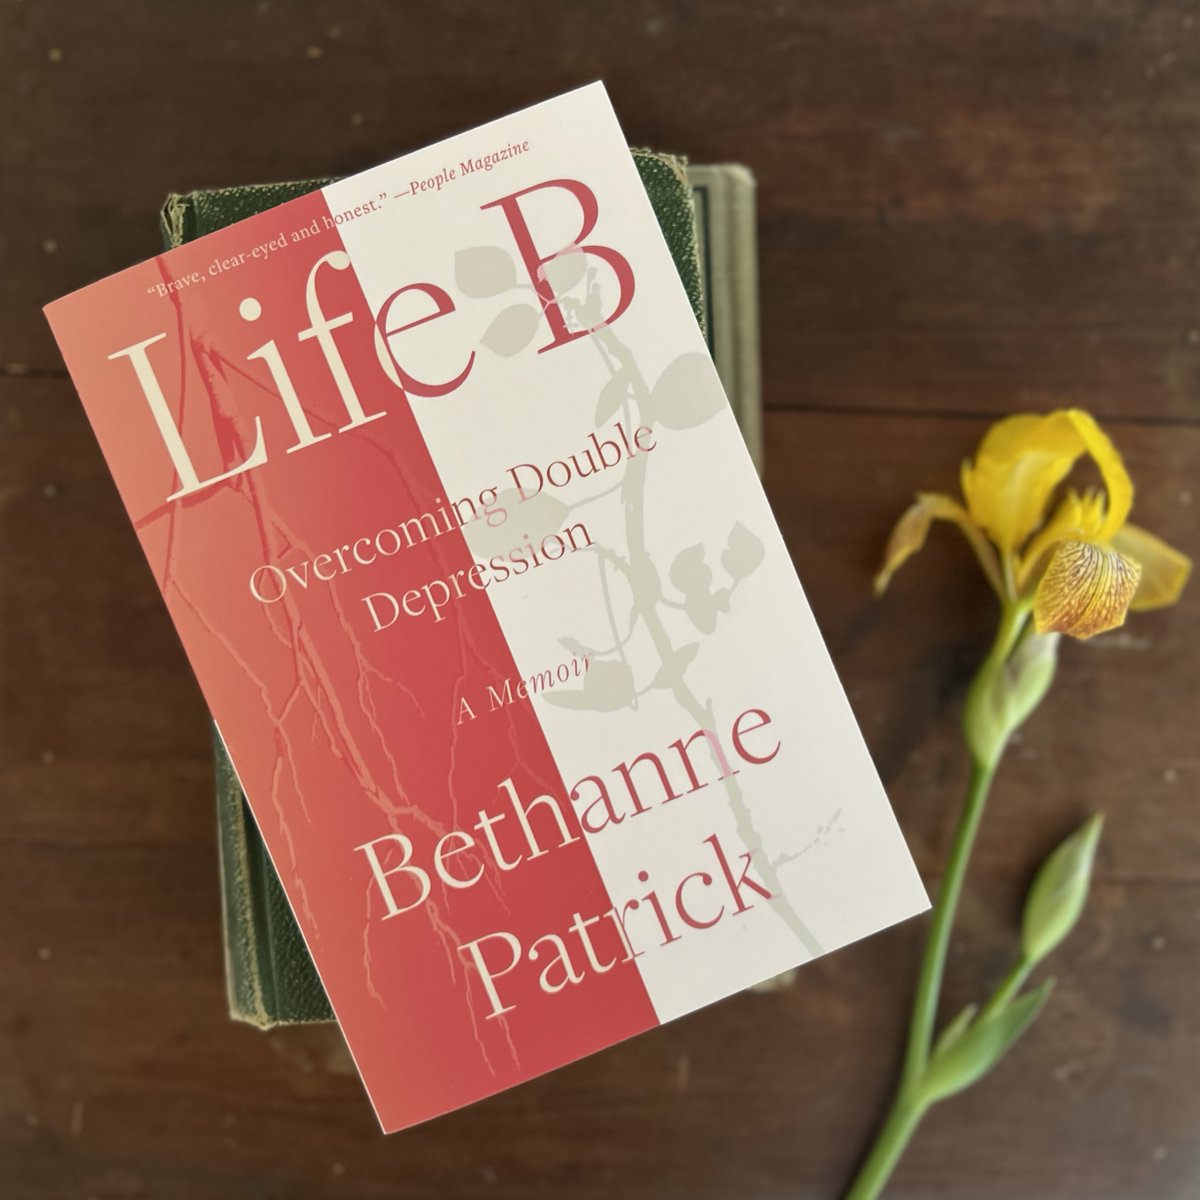 Happy paperback day to Bethanne Patrick! Life B: Overcoming Double Depression is out in a new edition now! Recognizing the intergenerational effects of trauma and mental health struggles, Patrick unearths the stories of her past in order to forge a better future for herself and